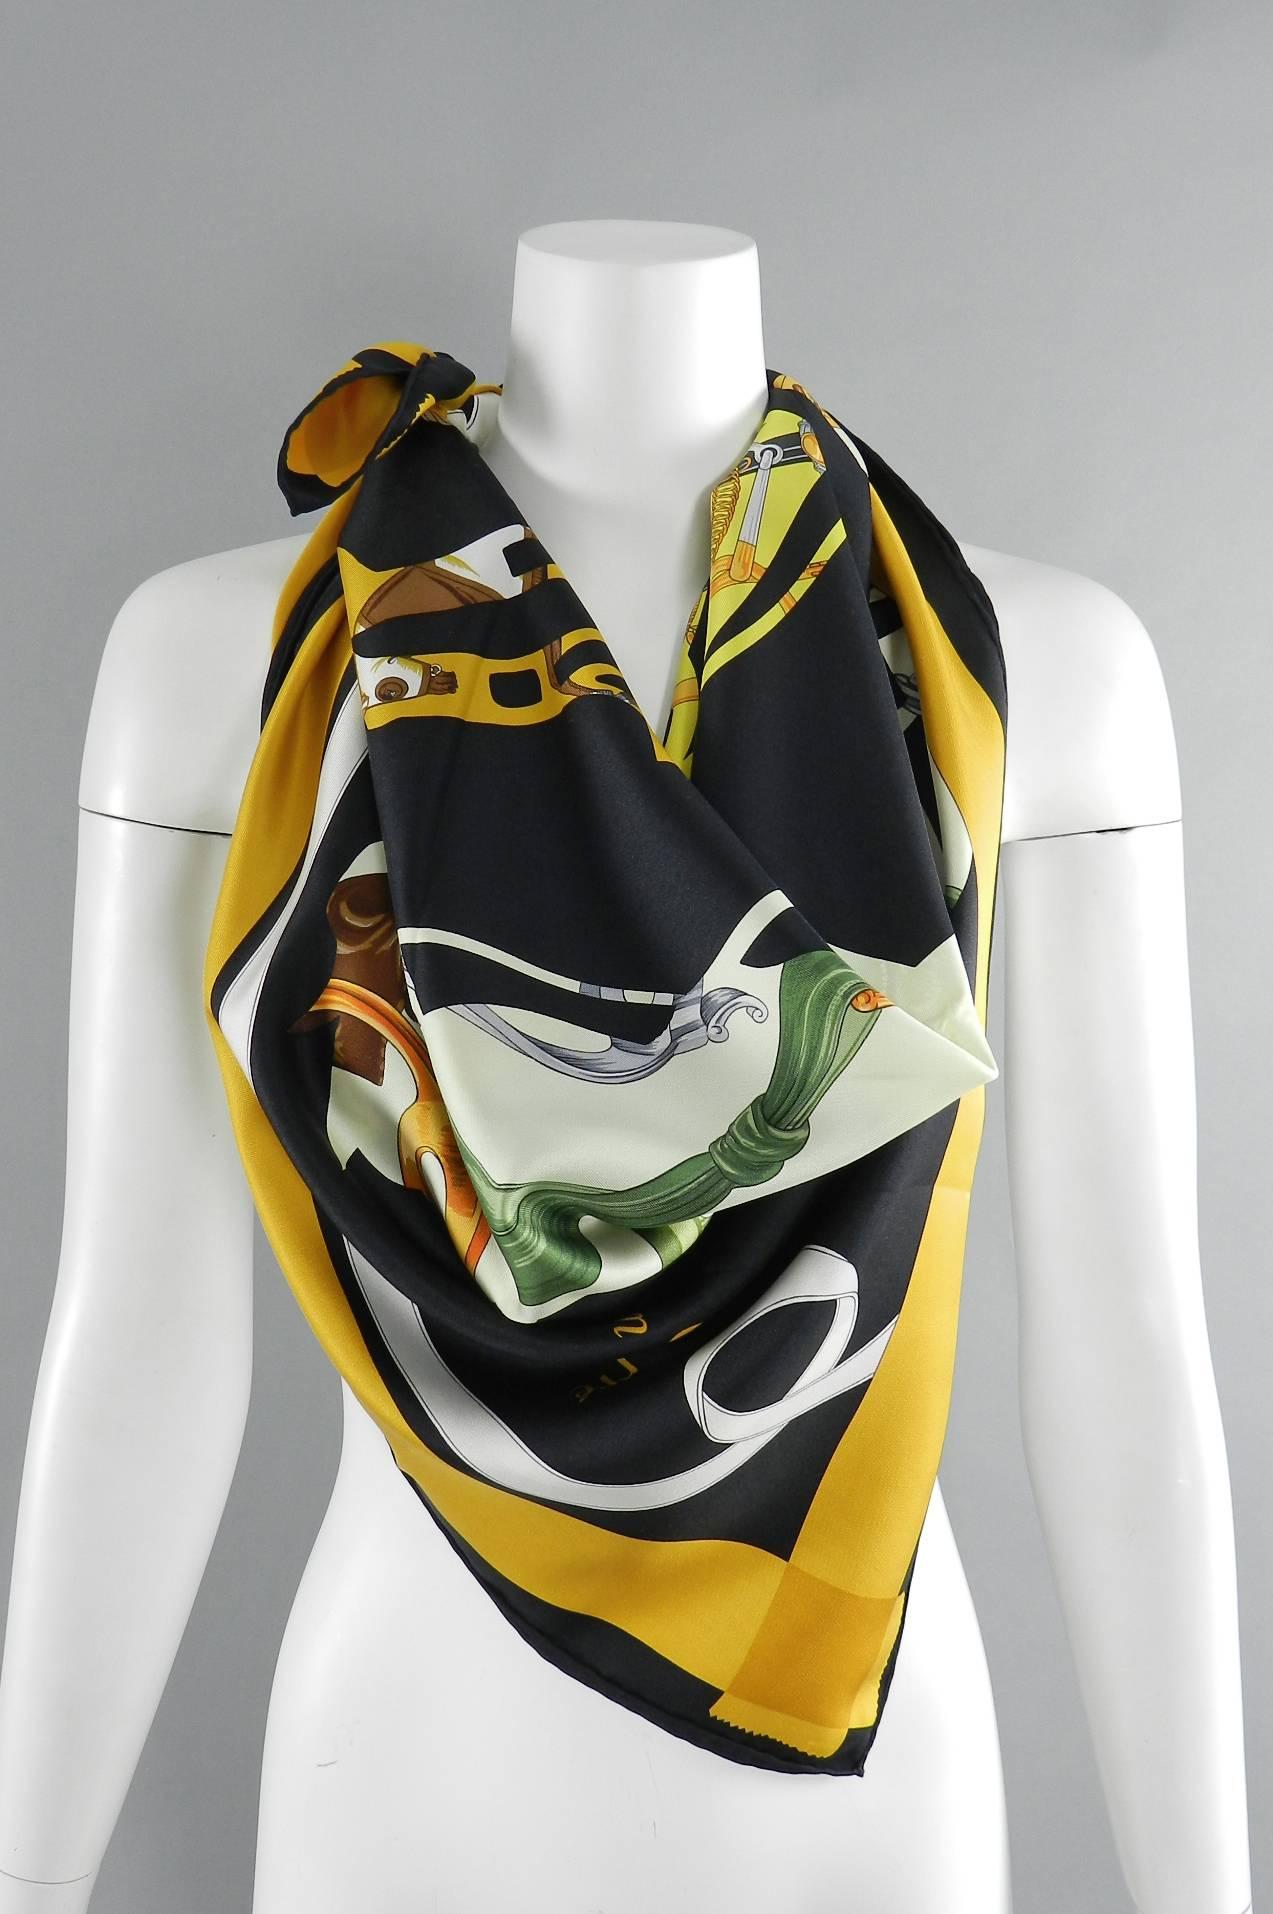 Hermes silk twill 90cm scarf - tout en Carre.  Artist is Bali Barret and year of production is 2006. Excellent clean condition with no flaws. Primary colors are yellow, black, mustard, and green. Carriage and horse design.

We ship worldwide.